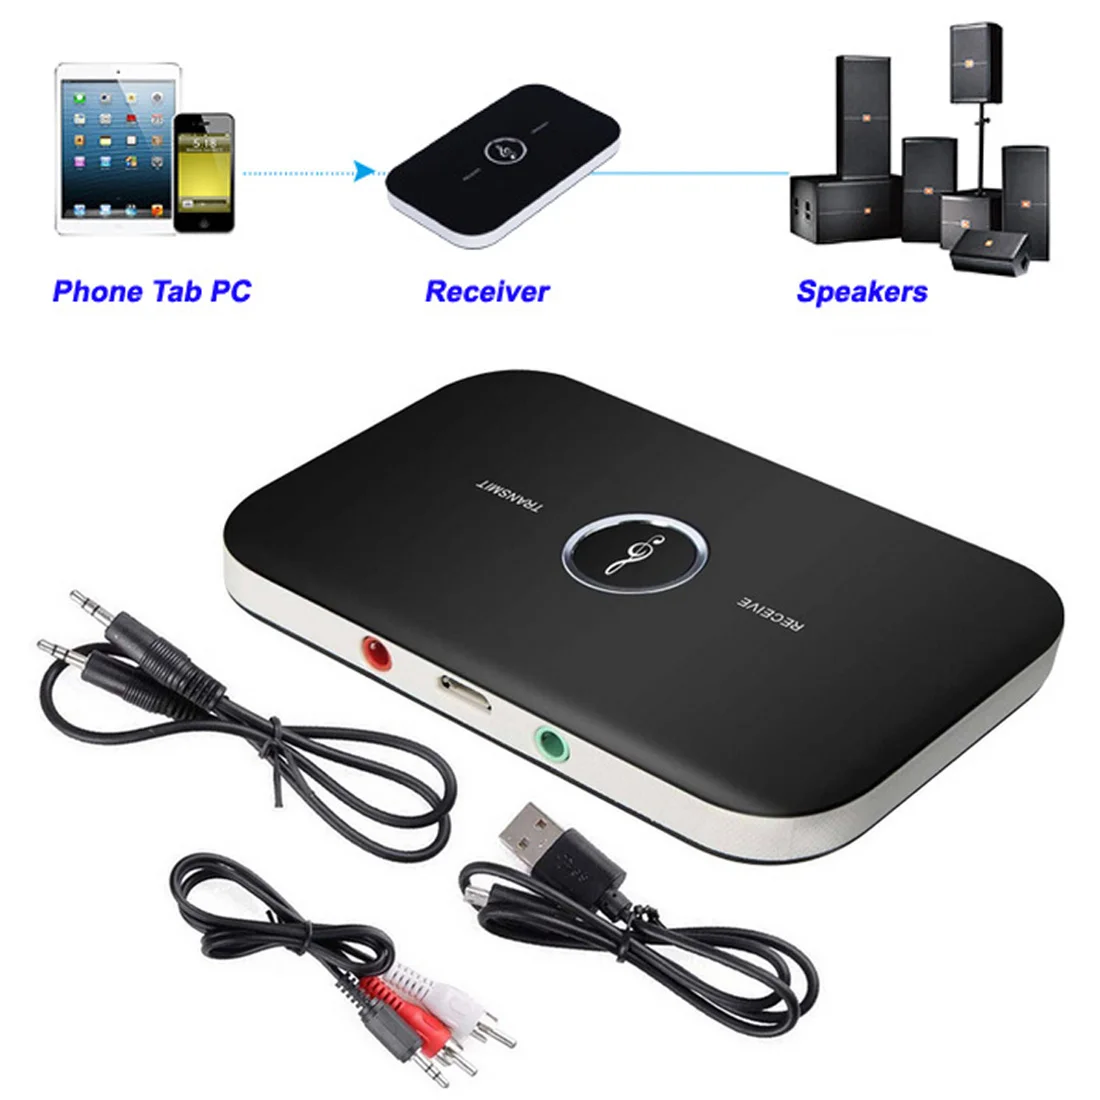 

B6 2 in 1 Wireless Bluetooth Receiver Transmitter 4.1 Audio 3.5mm Adapter For PC Smartphone Bluetooth Receiver Transmitter Aux